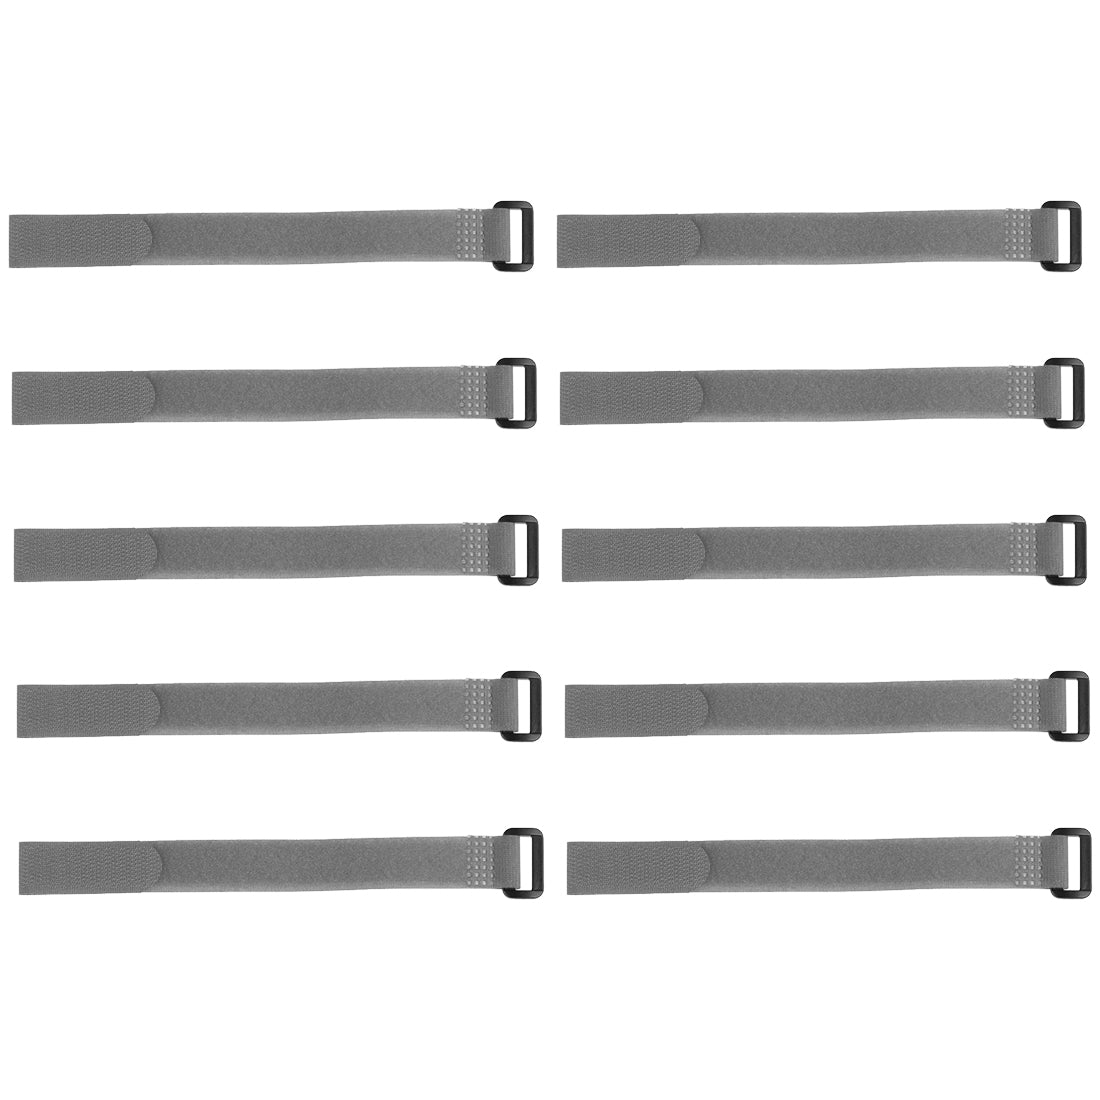 uxcell Uxcell 10pcs Hook and Loop Straps 3/4-inch x 18-inch Securing Straps Cable Tie (Gray)